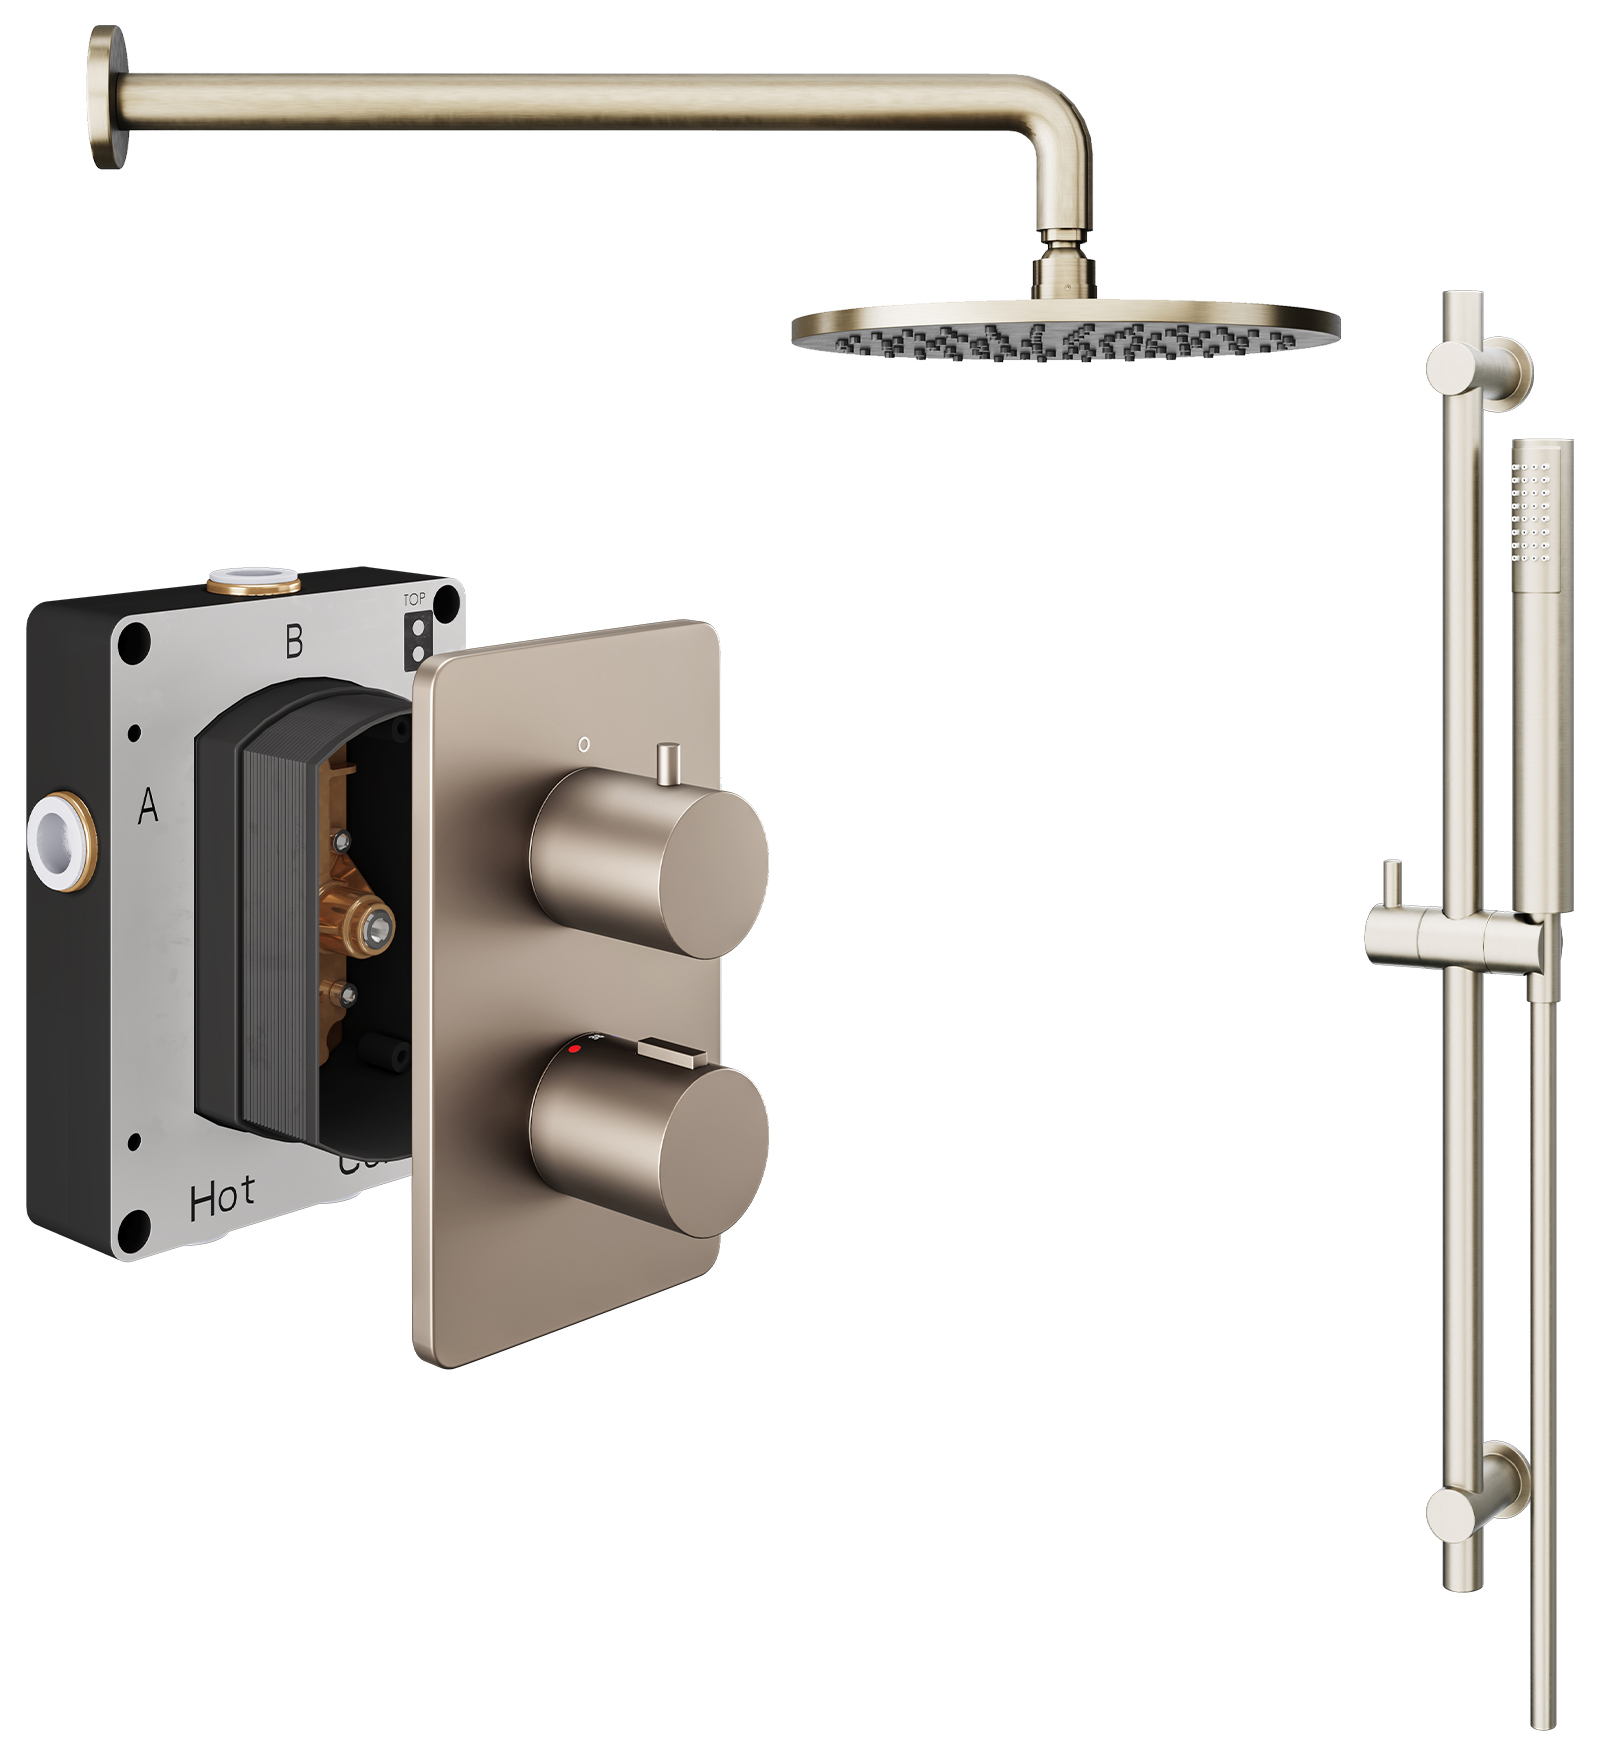 Hadleigh Recessed Dual Control Round Mixer Shower Includes Shower Valve, Shower Head & Riser Rail - Brushed Nickel